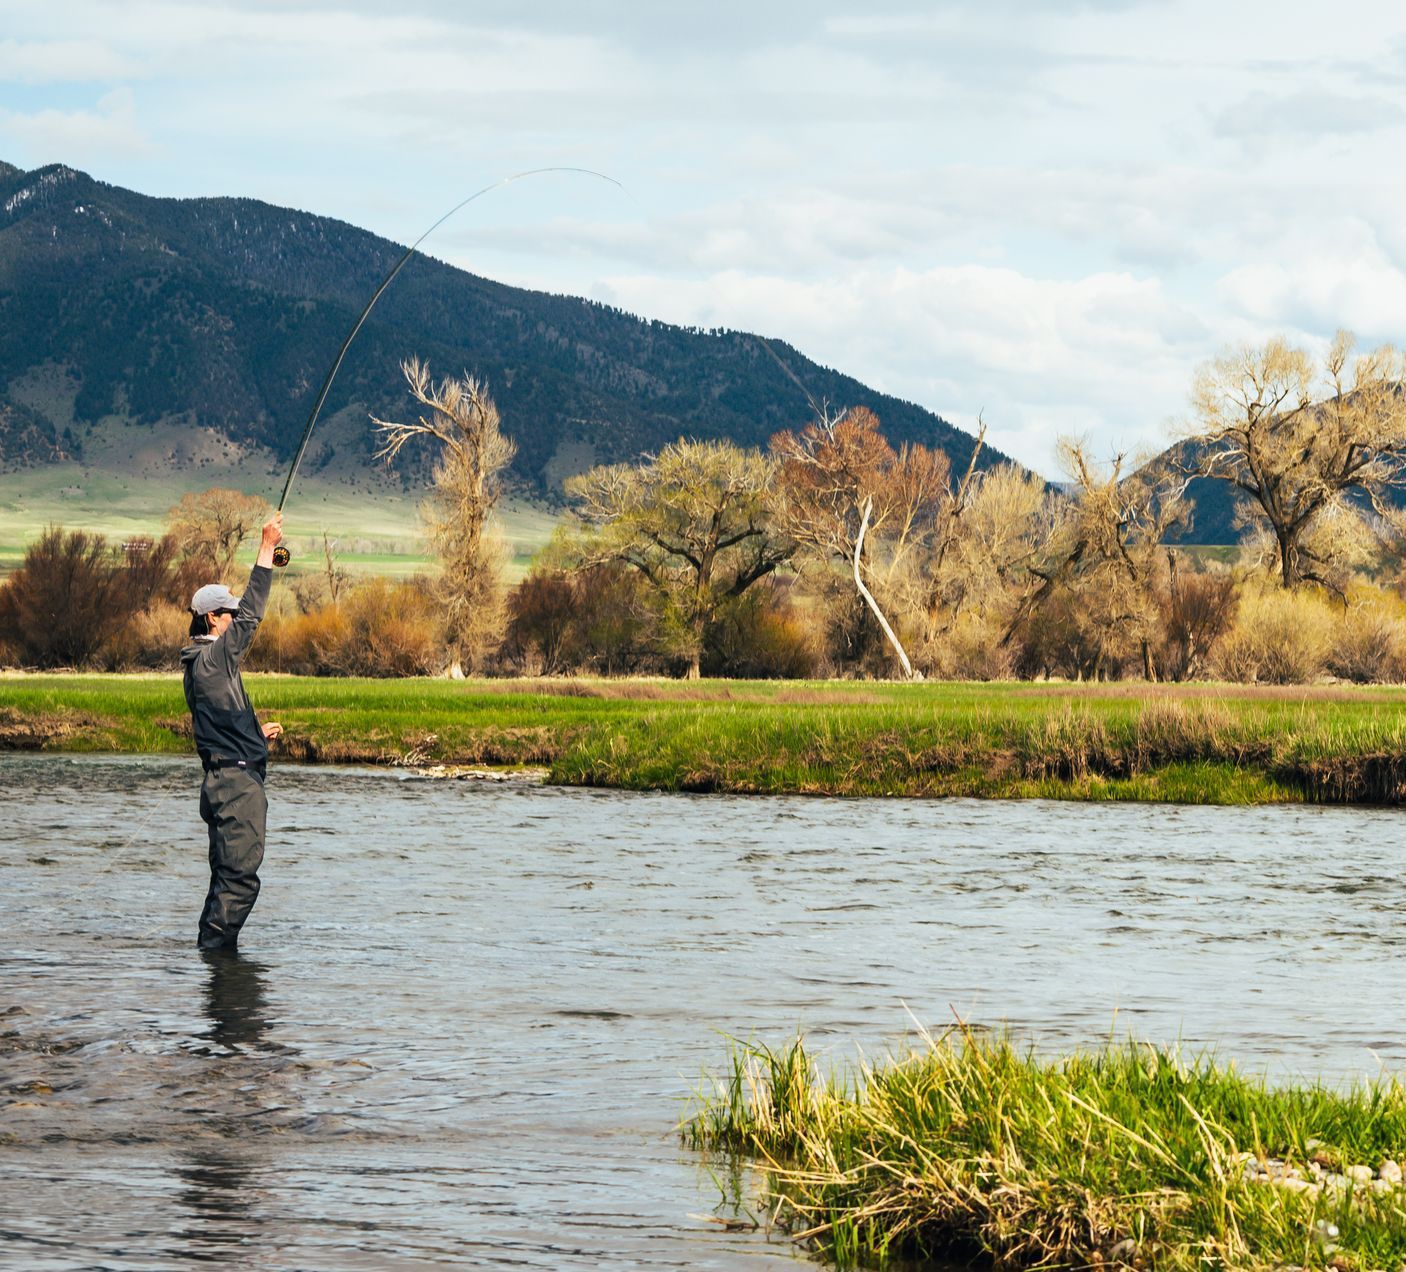 A man is fishing in a river with mountains in the background